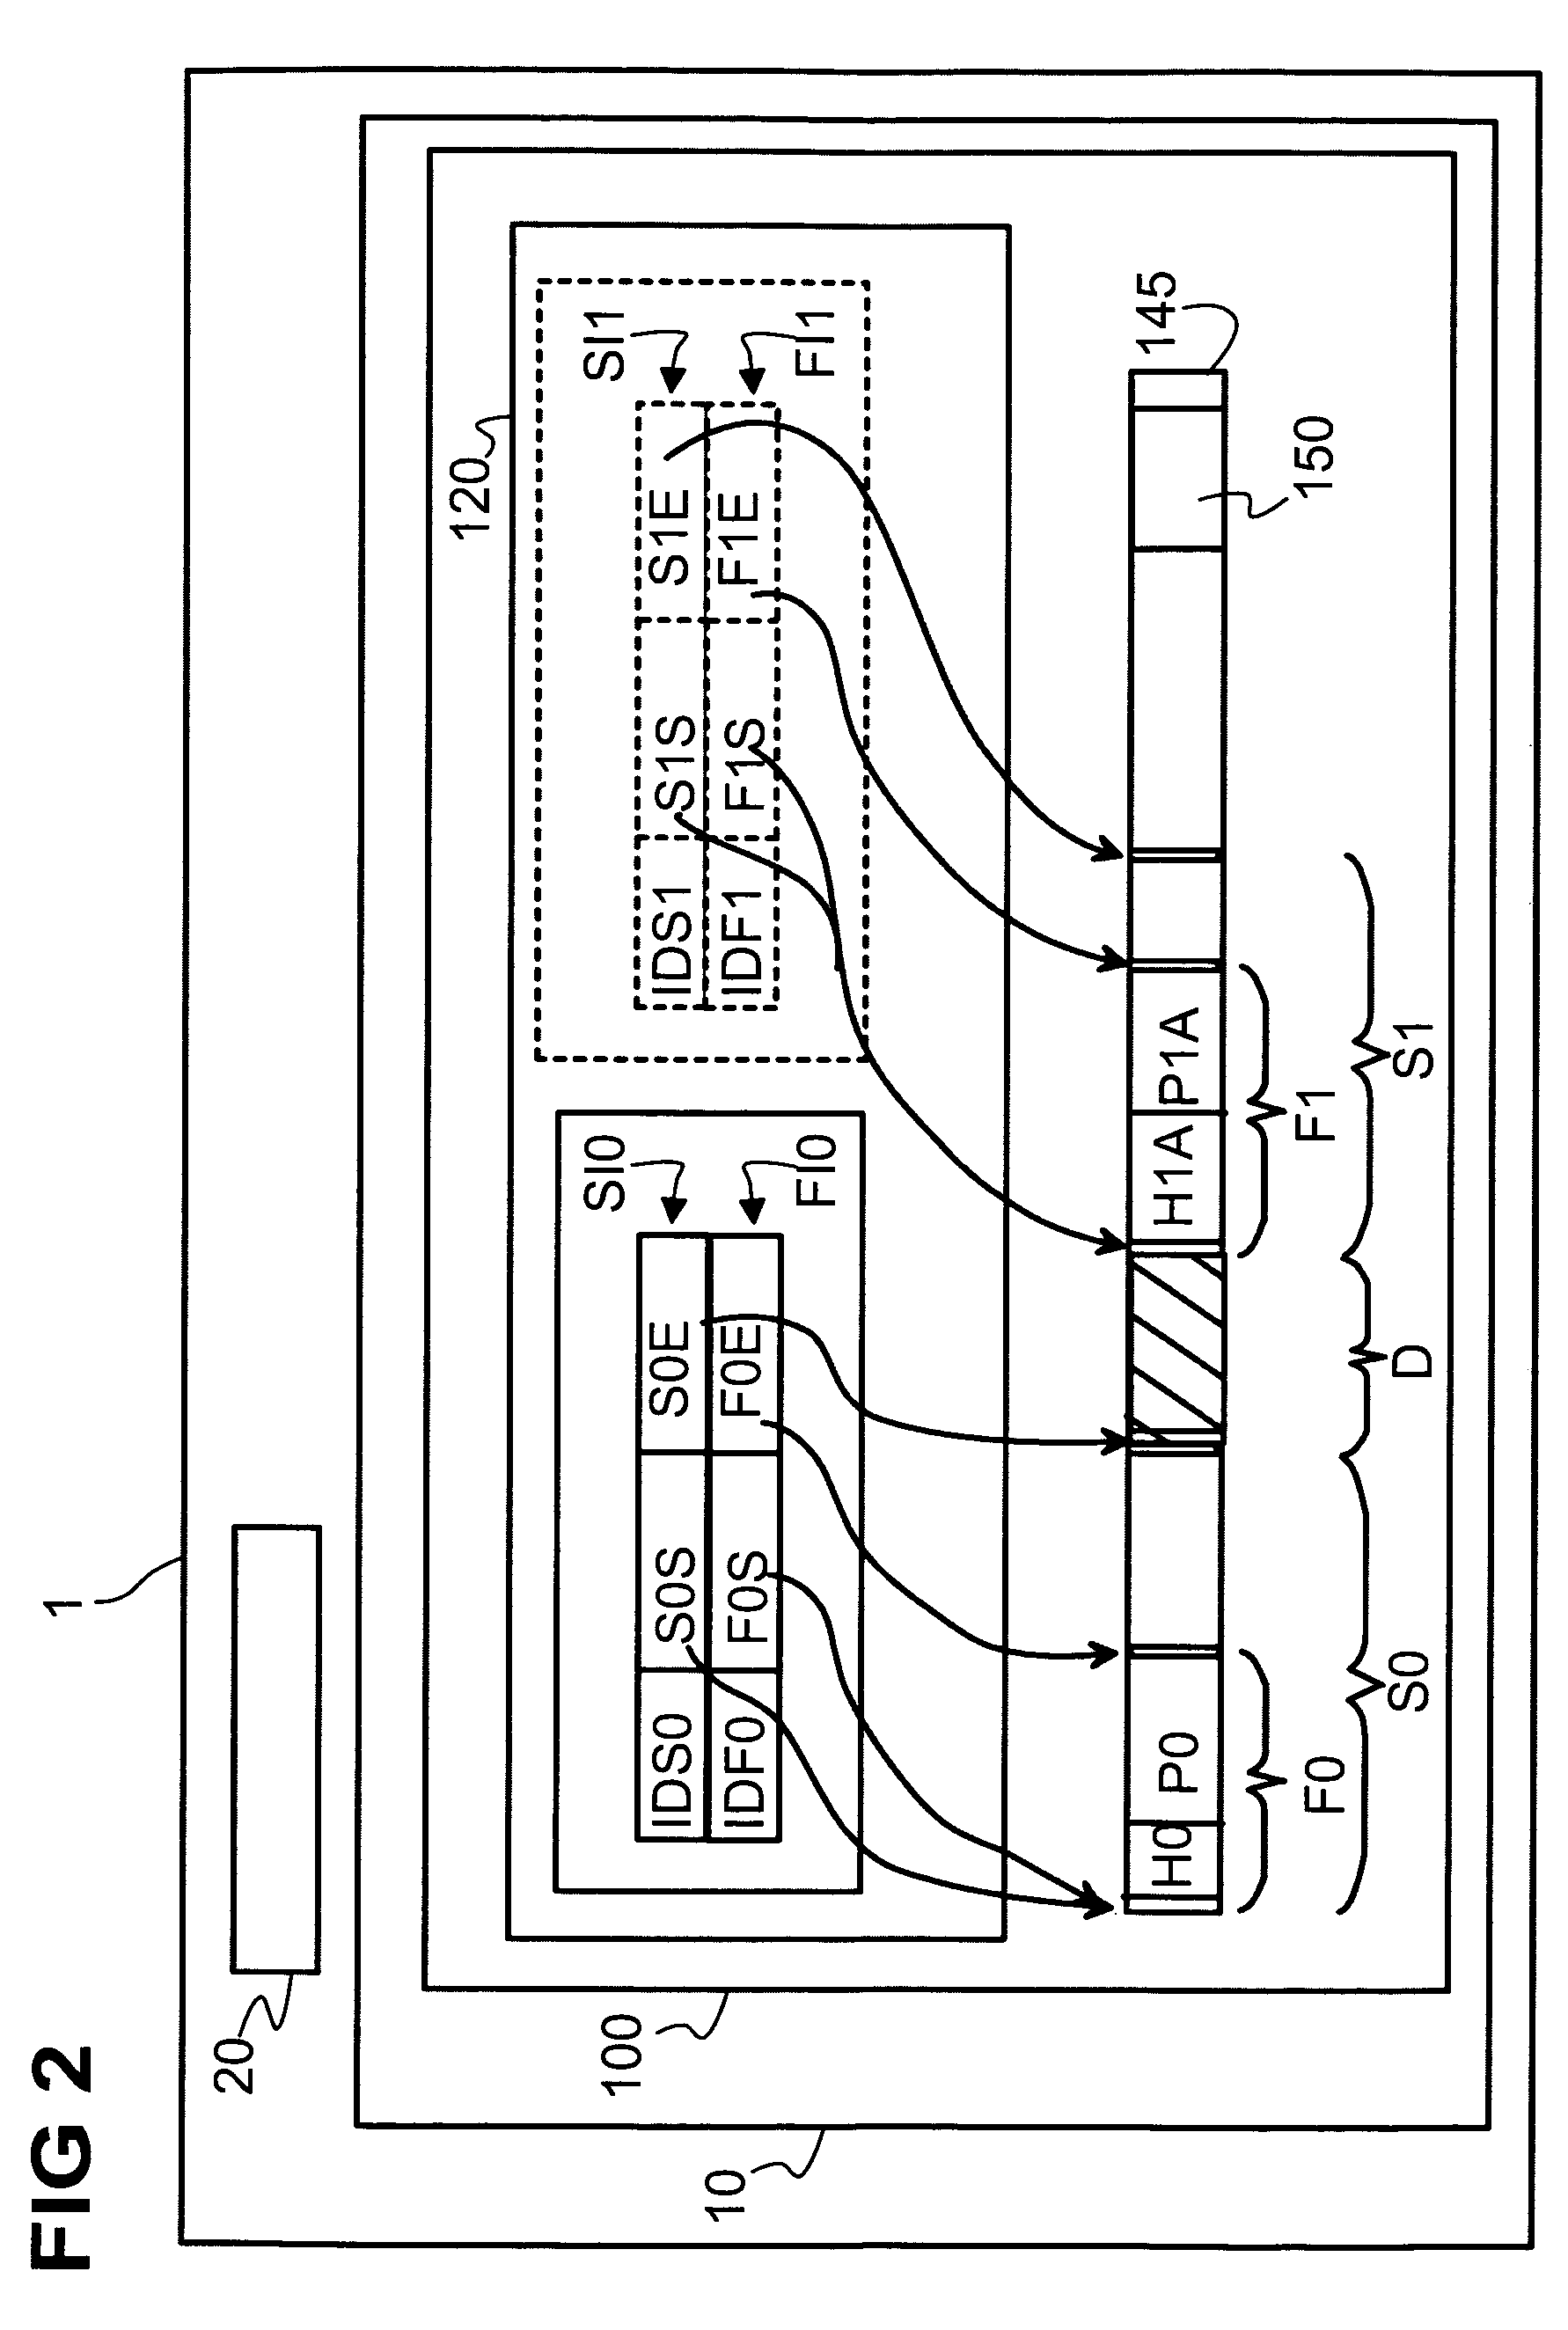 Method of storing and organizing files on a storage medium via a file system